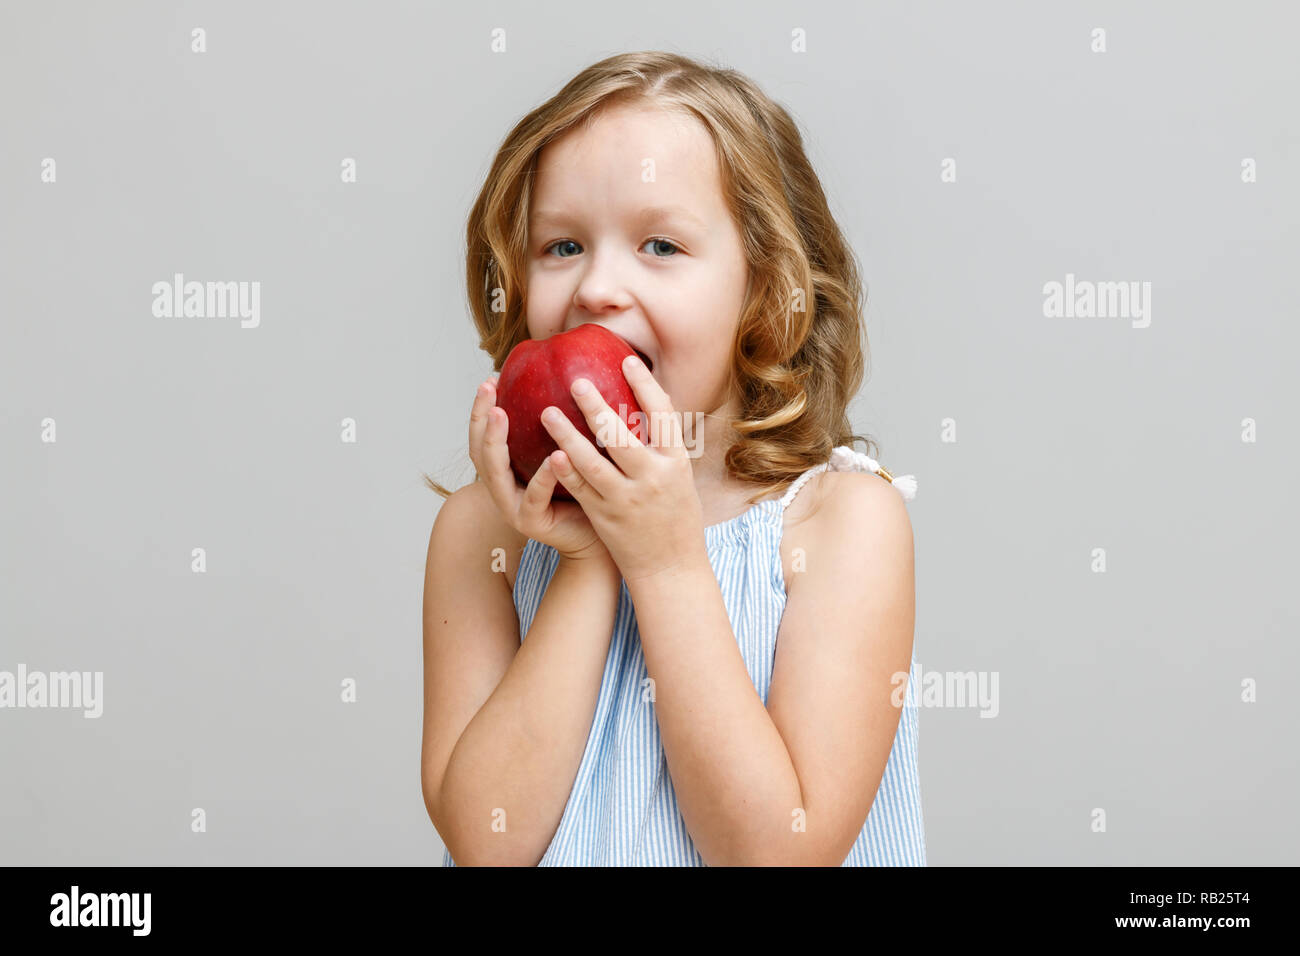 Portrait of a happy smiling little blonde girl on a gray background. Baby bites red apple Stock Photo